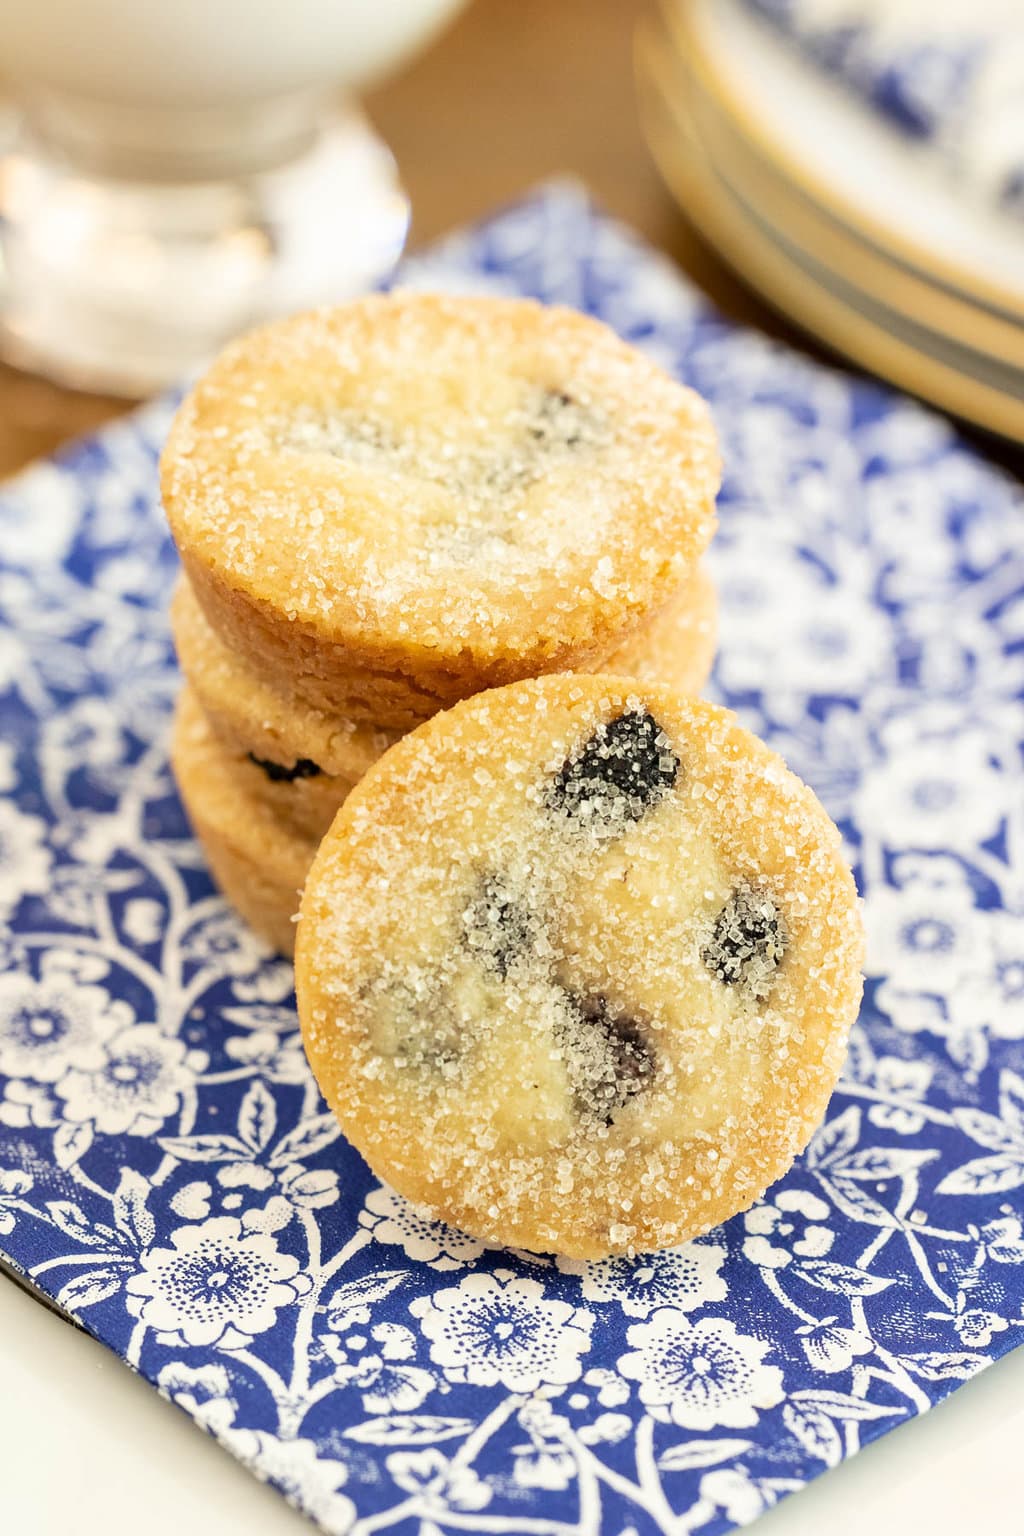 Vertical closeup photo of a stack of Ridiculously Easy Lemon Blueberry Shortbread Bites on a blue and white patterned napkin.